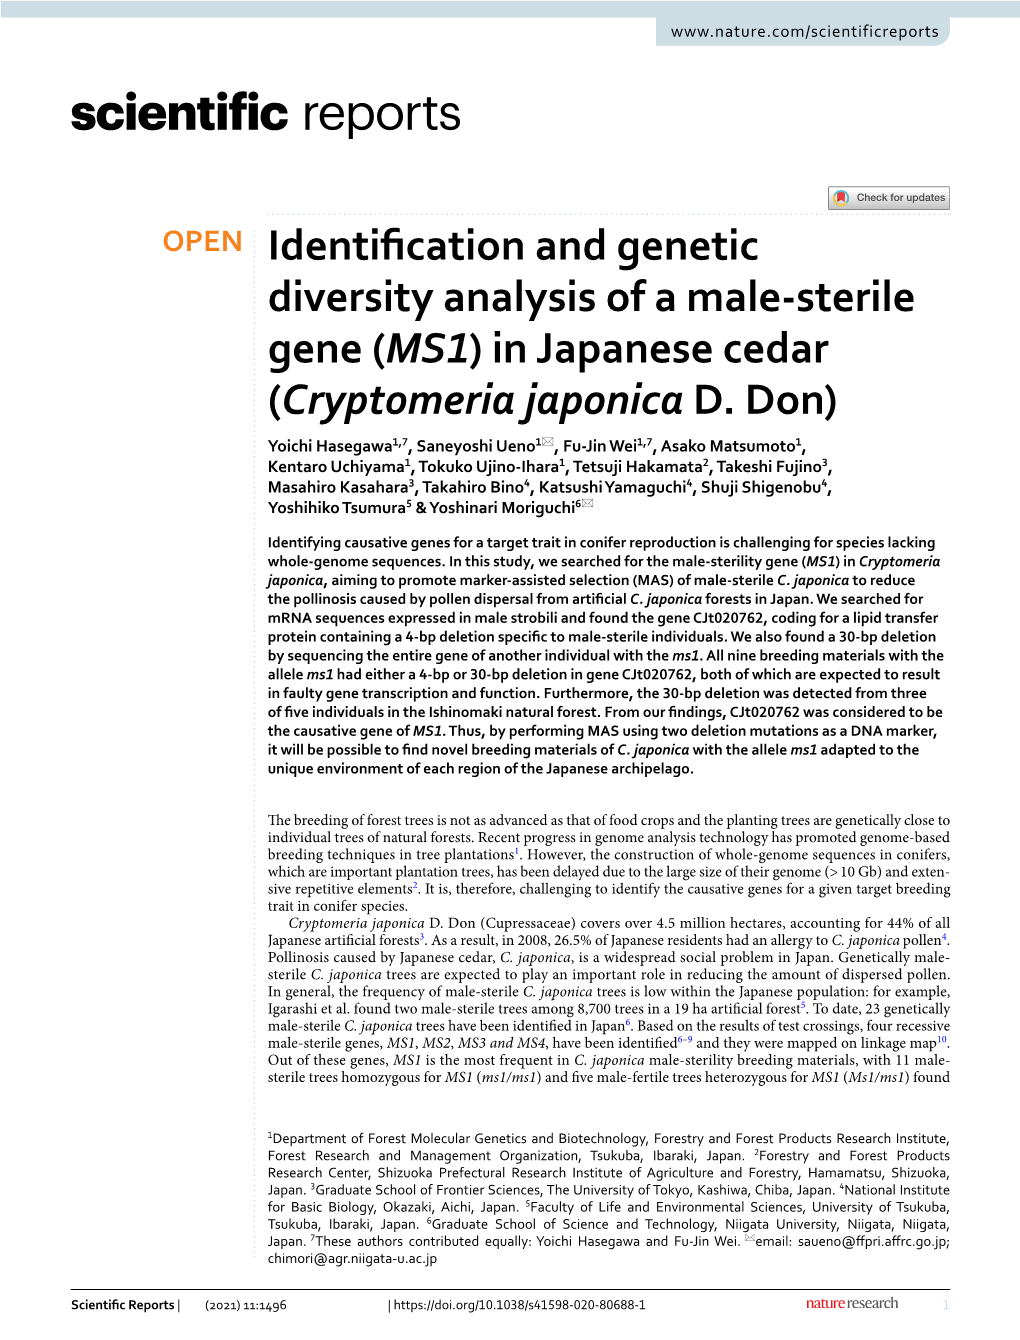 Identification and Genetic Diversity Analysis of a Male-Sterile Gene